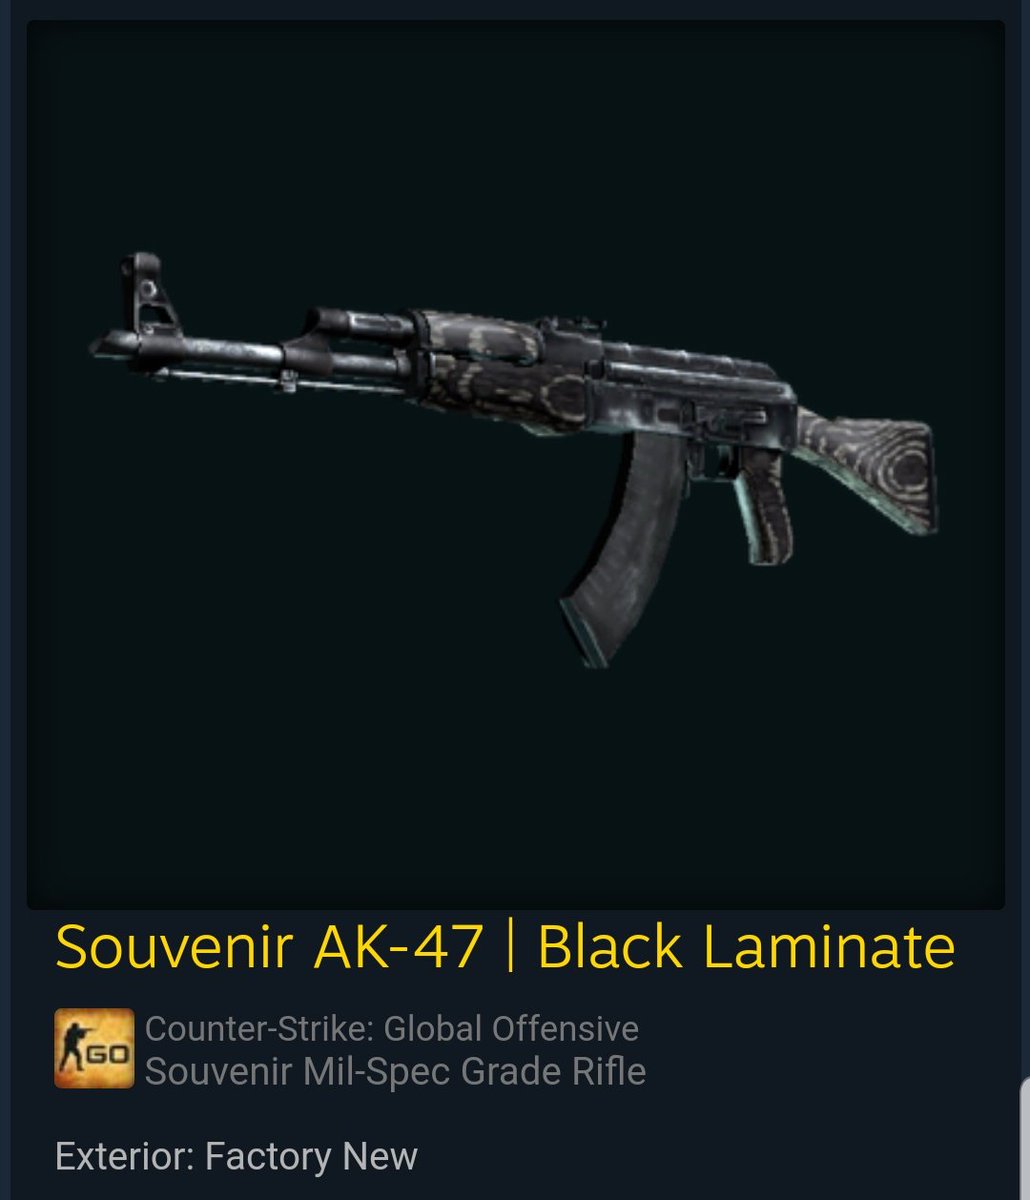 ohnePixel on Twitter: "Souvenir AK-47 Black Laminate *20 days after it started dropping* Highest Sale Price = $660 💸 Souvenir / Non = ~30% higher $ Current Supply = 2,346 FNs = 22 https://t.co/arVsyQjflp" / Twitter